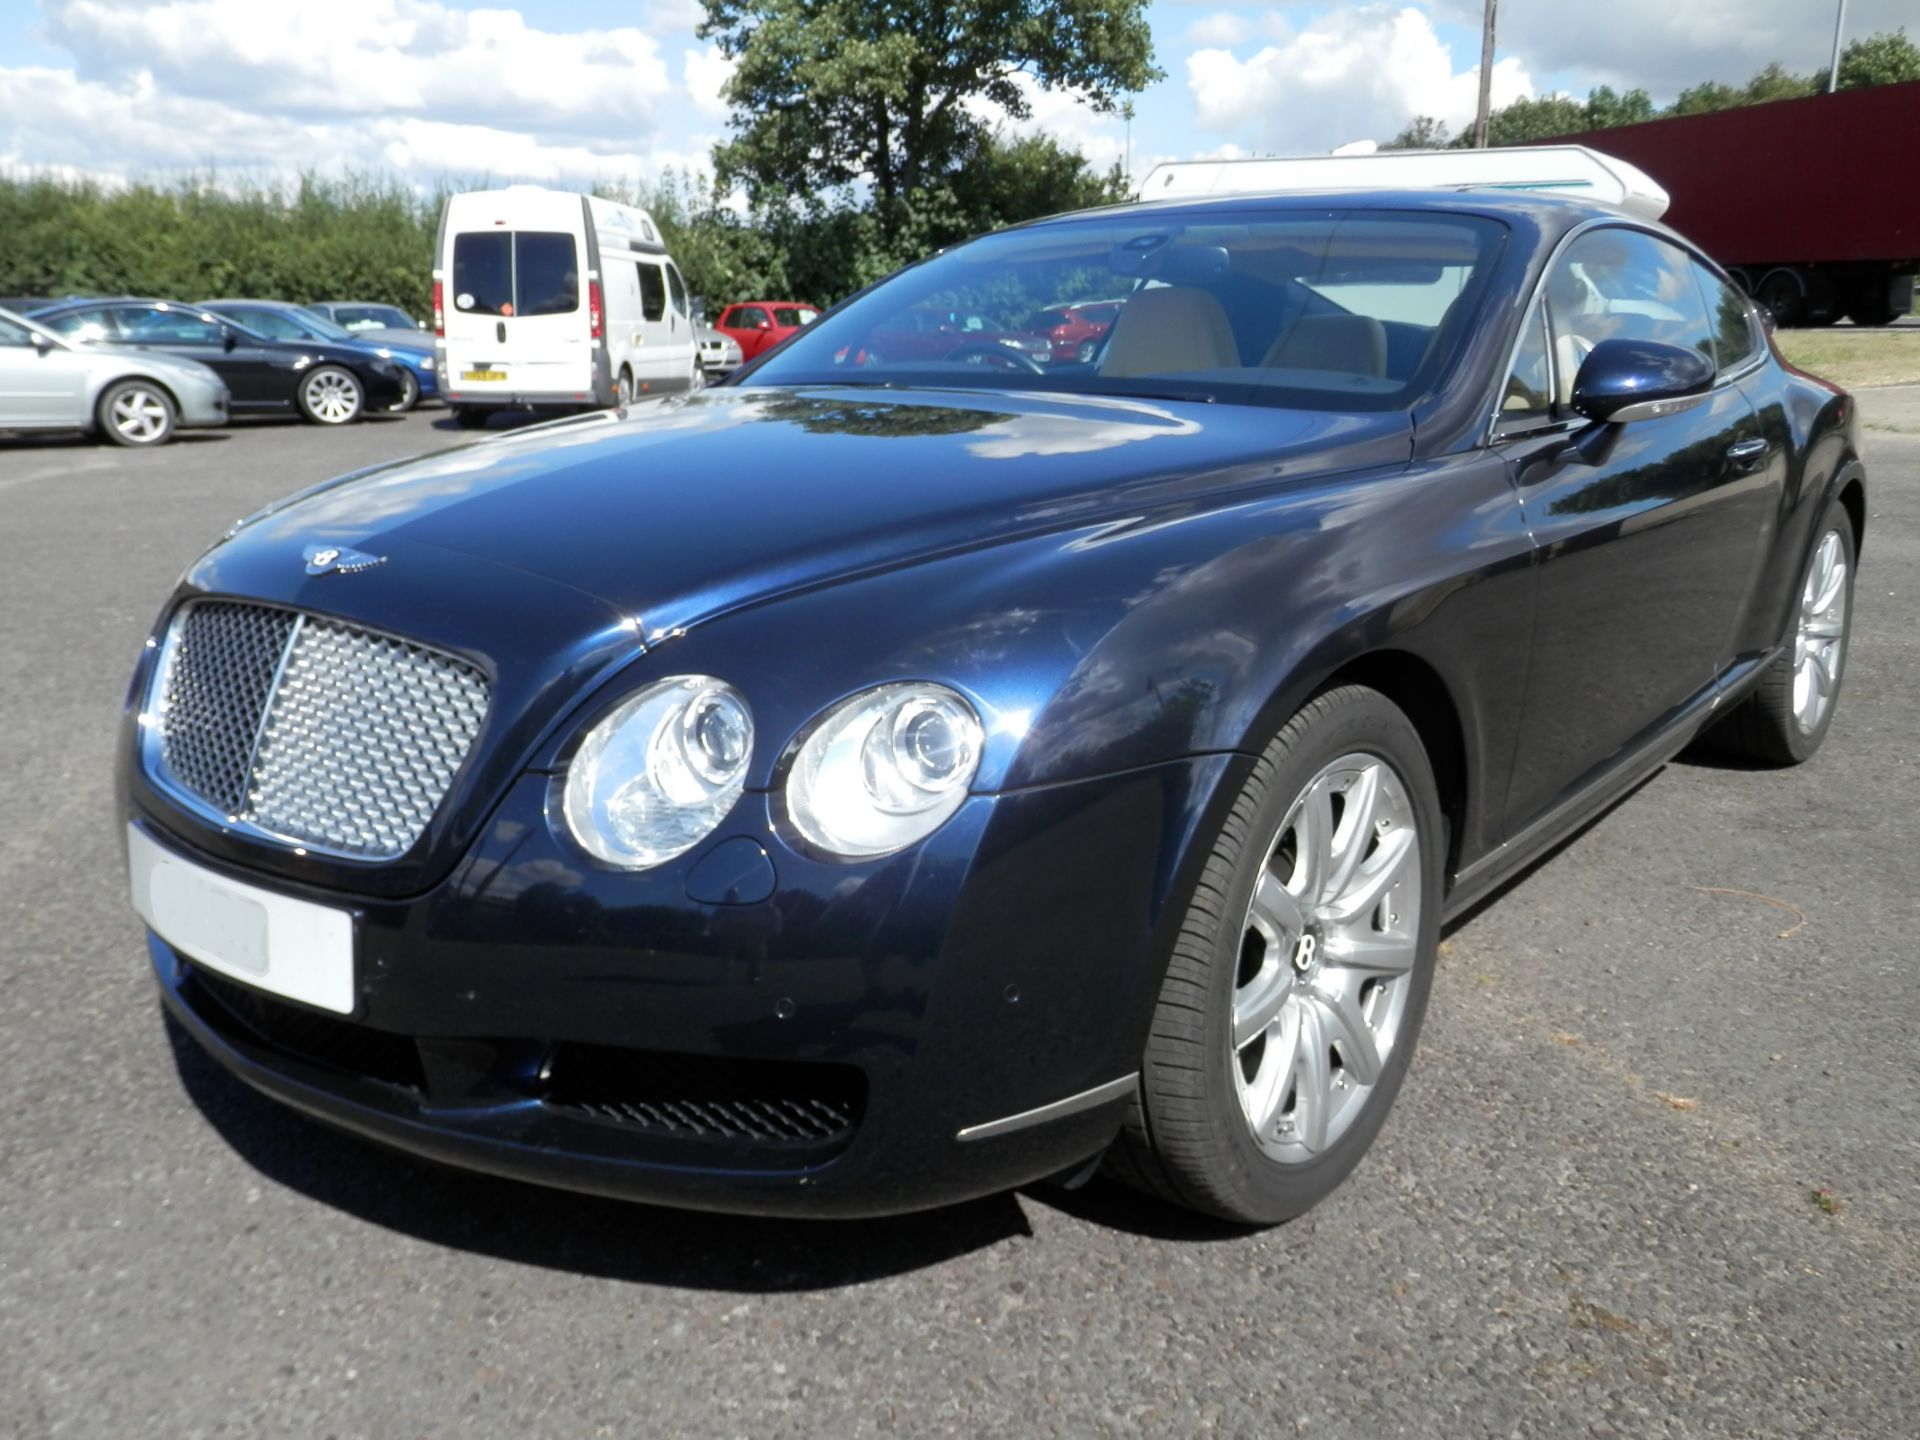 STUNNING 2007 BENTLEY GT CONTINENTAL, 6.0L TWIN TURBO,35K MILES, BLUE, CREAM LEATHER, FULL HISTORY. - Image 5 of 53